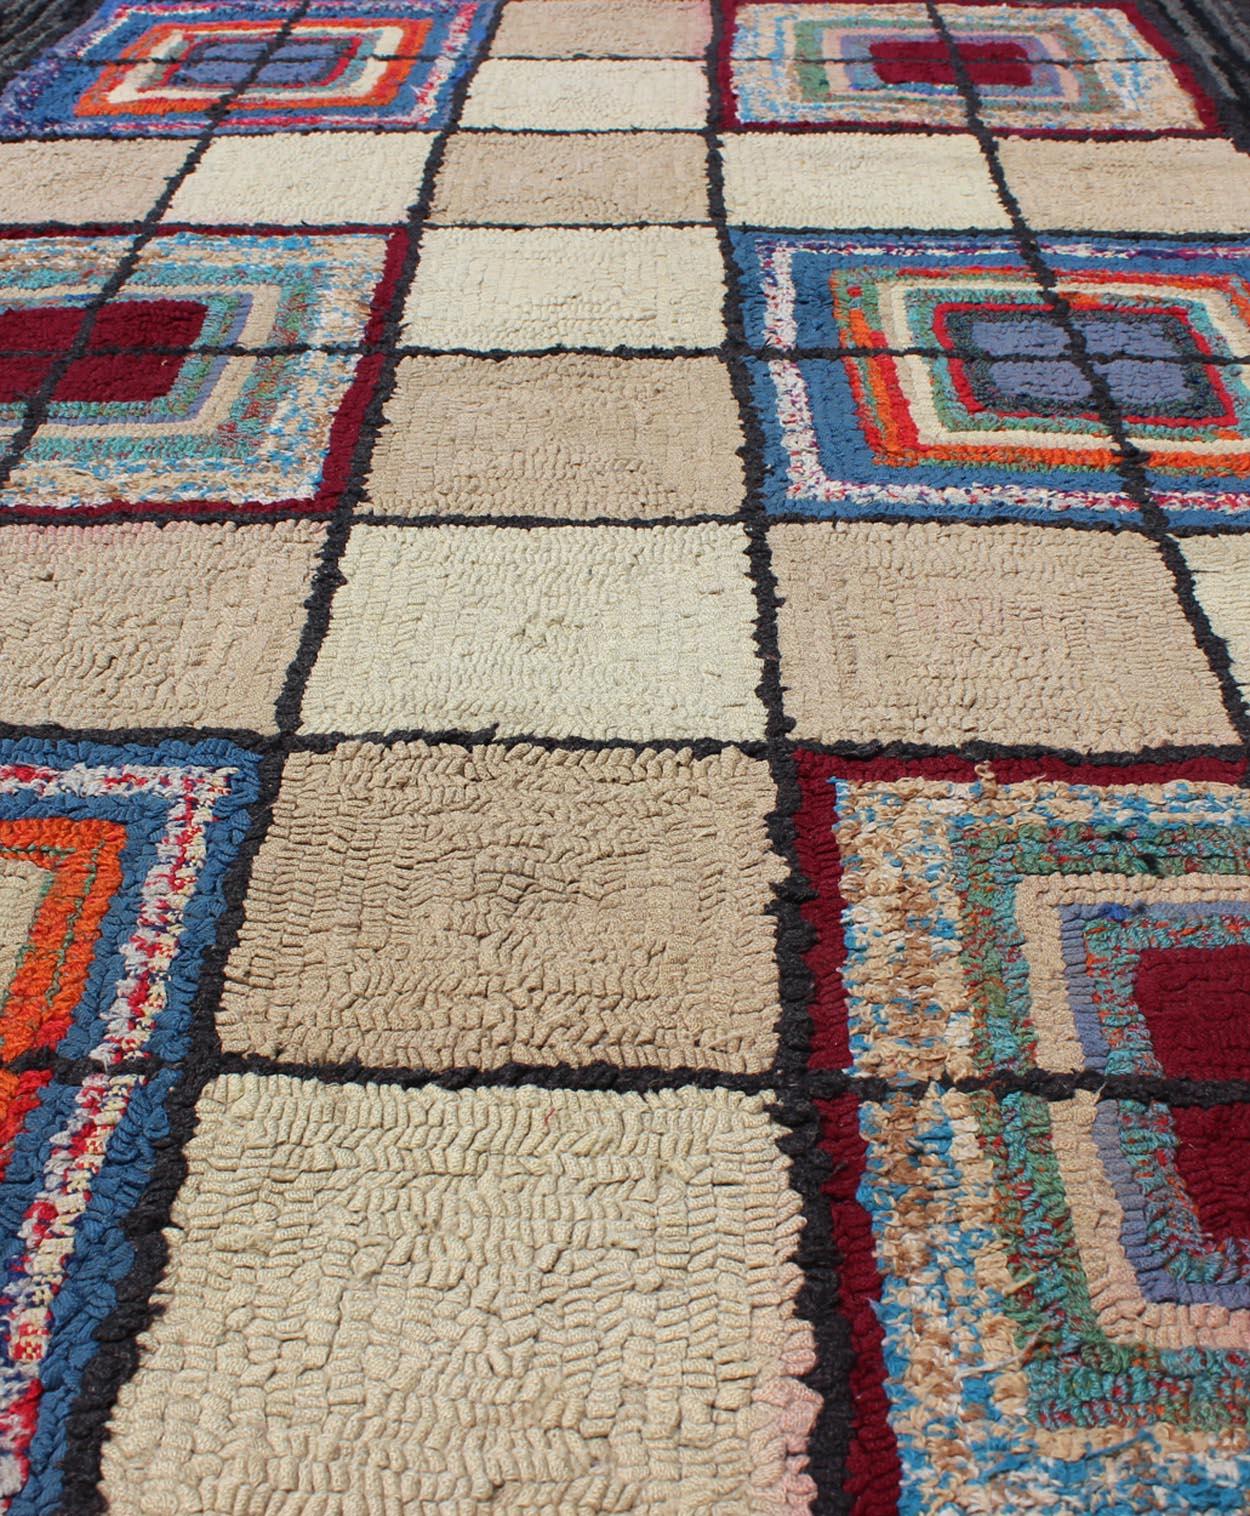 Hand-Knotted Checkerboard Vintage American Hooked Rug with Geometric Cross Designs For Sale